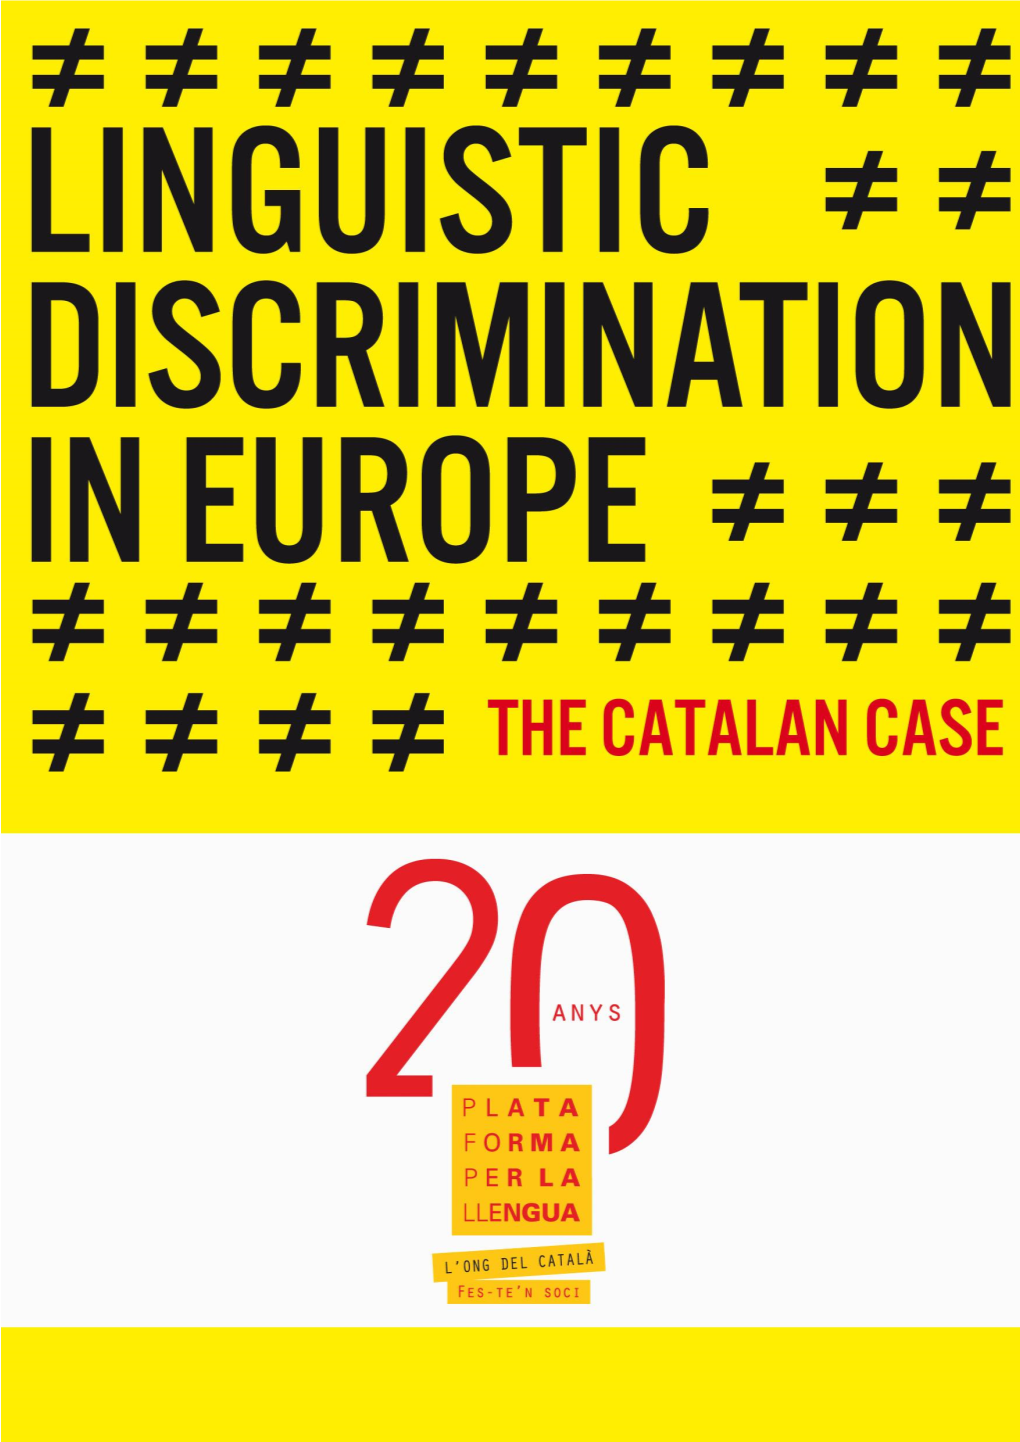 40 Serious Cases of Linguistic Discrimination in the Public Administration, 2007-2013